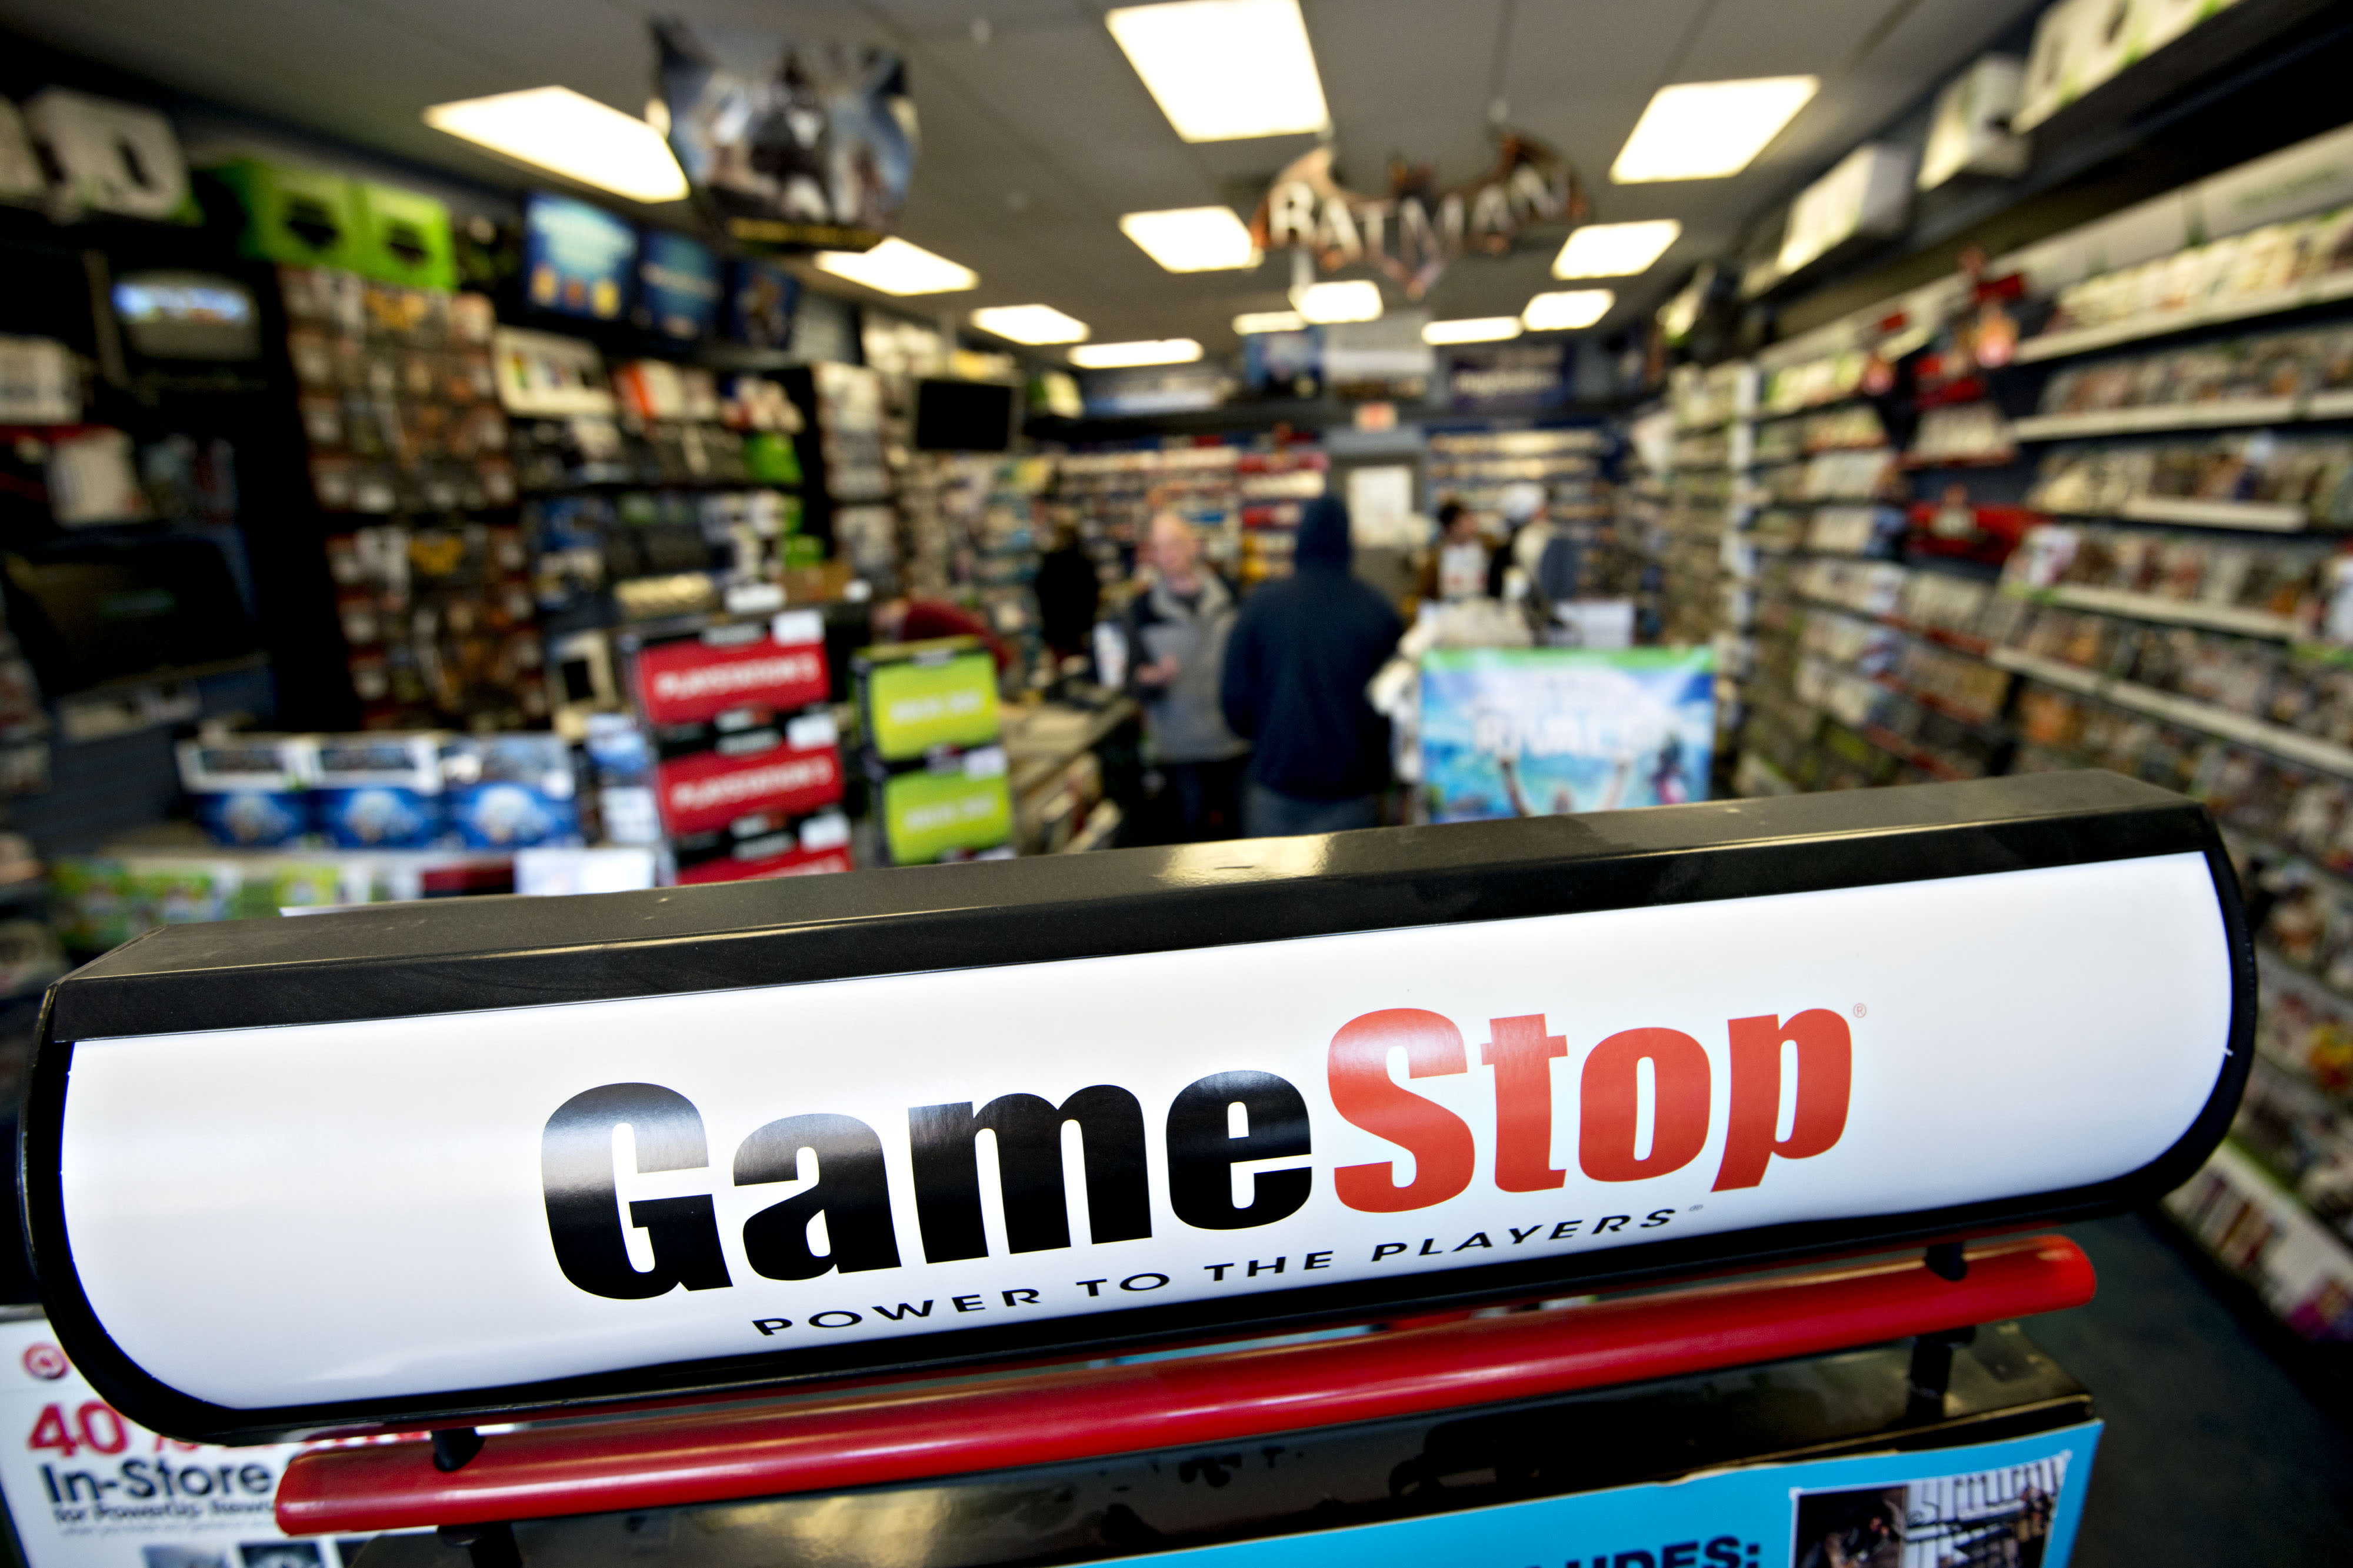 GameStop CEO Mike Mauler stepping down after 3 month, Daniel DeMatteo to  serve as interim CEO - Dallas Business Journal